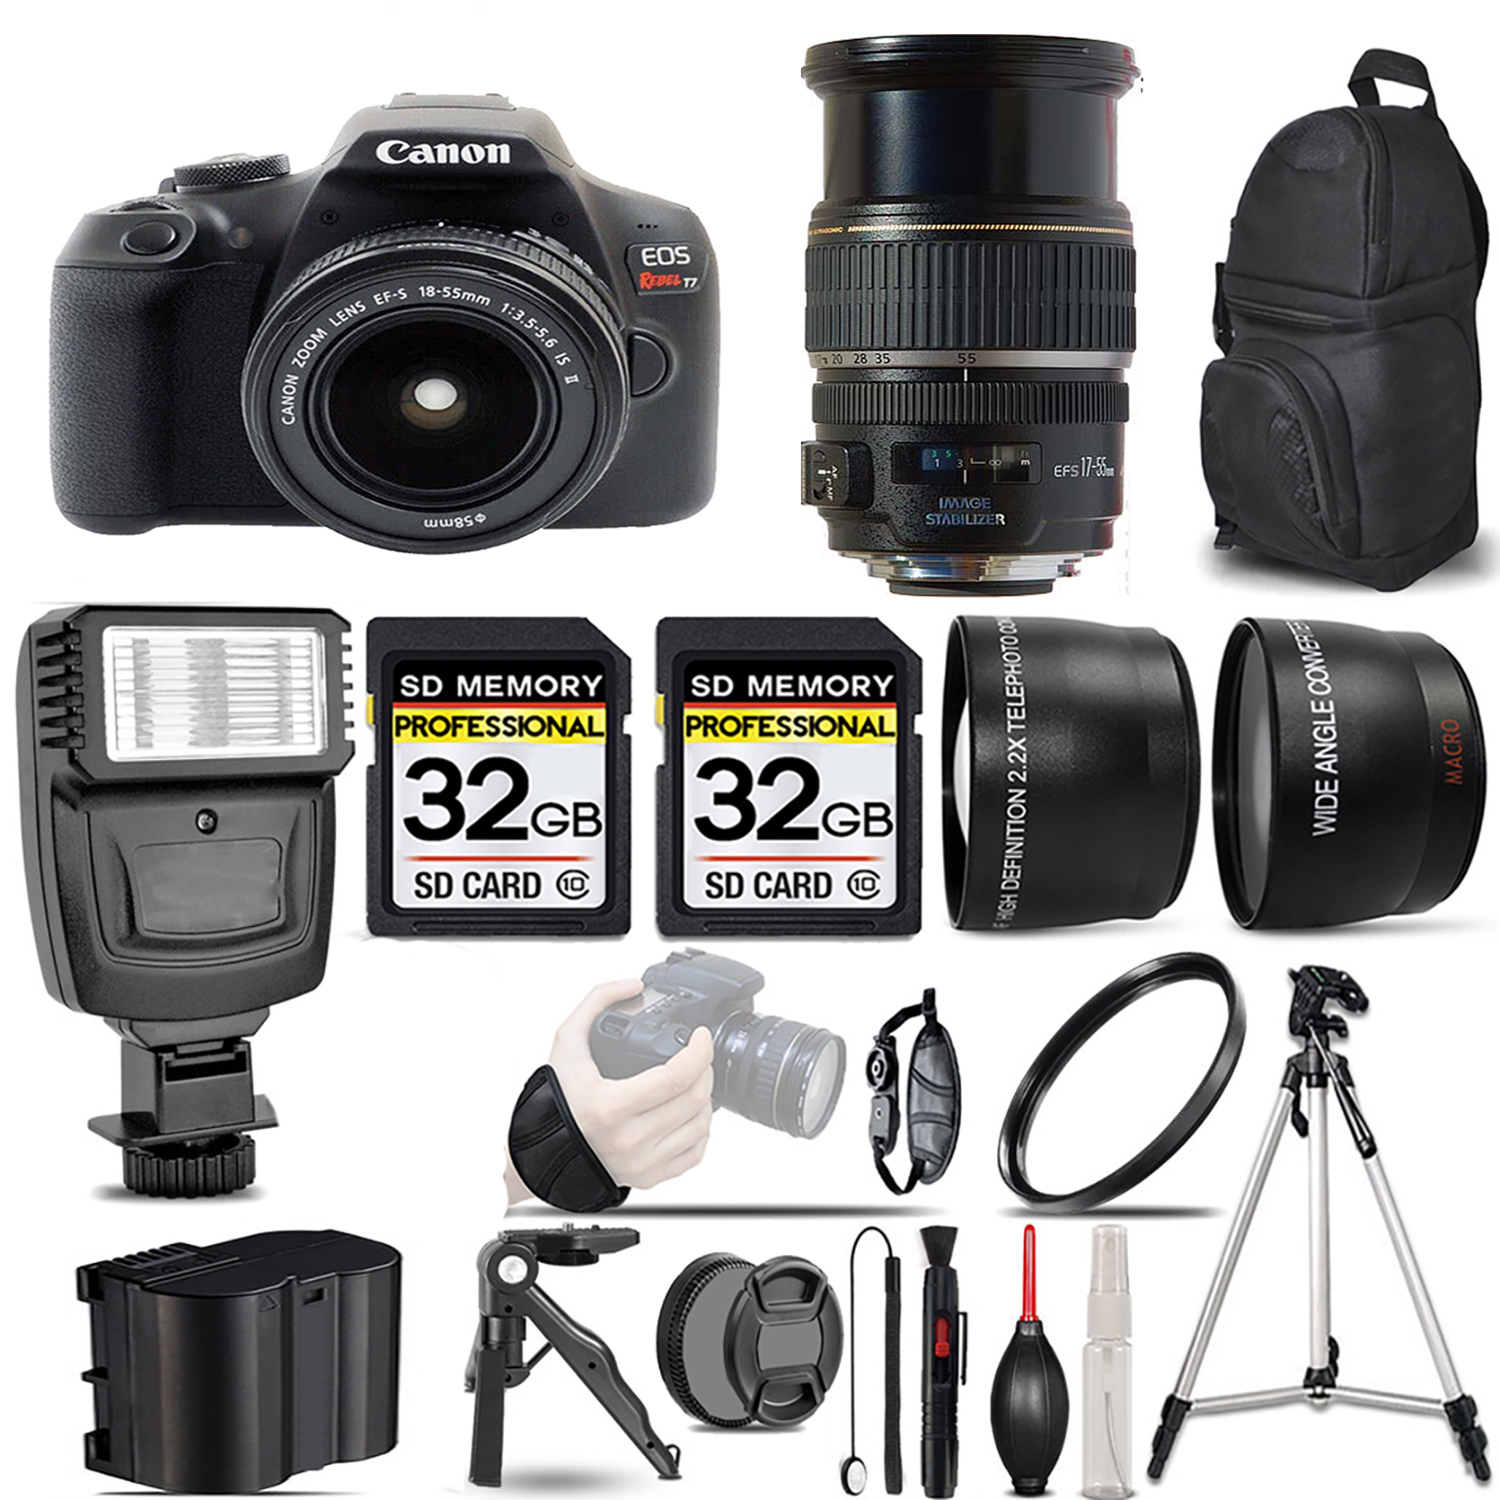 EOS Rebel T7 with 18-55mm Lens + 17-55mm f/2.8 IS USM Lens + Flash + 64GB - Kit *FREE SHIPPING*